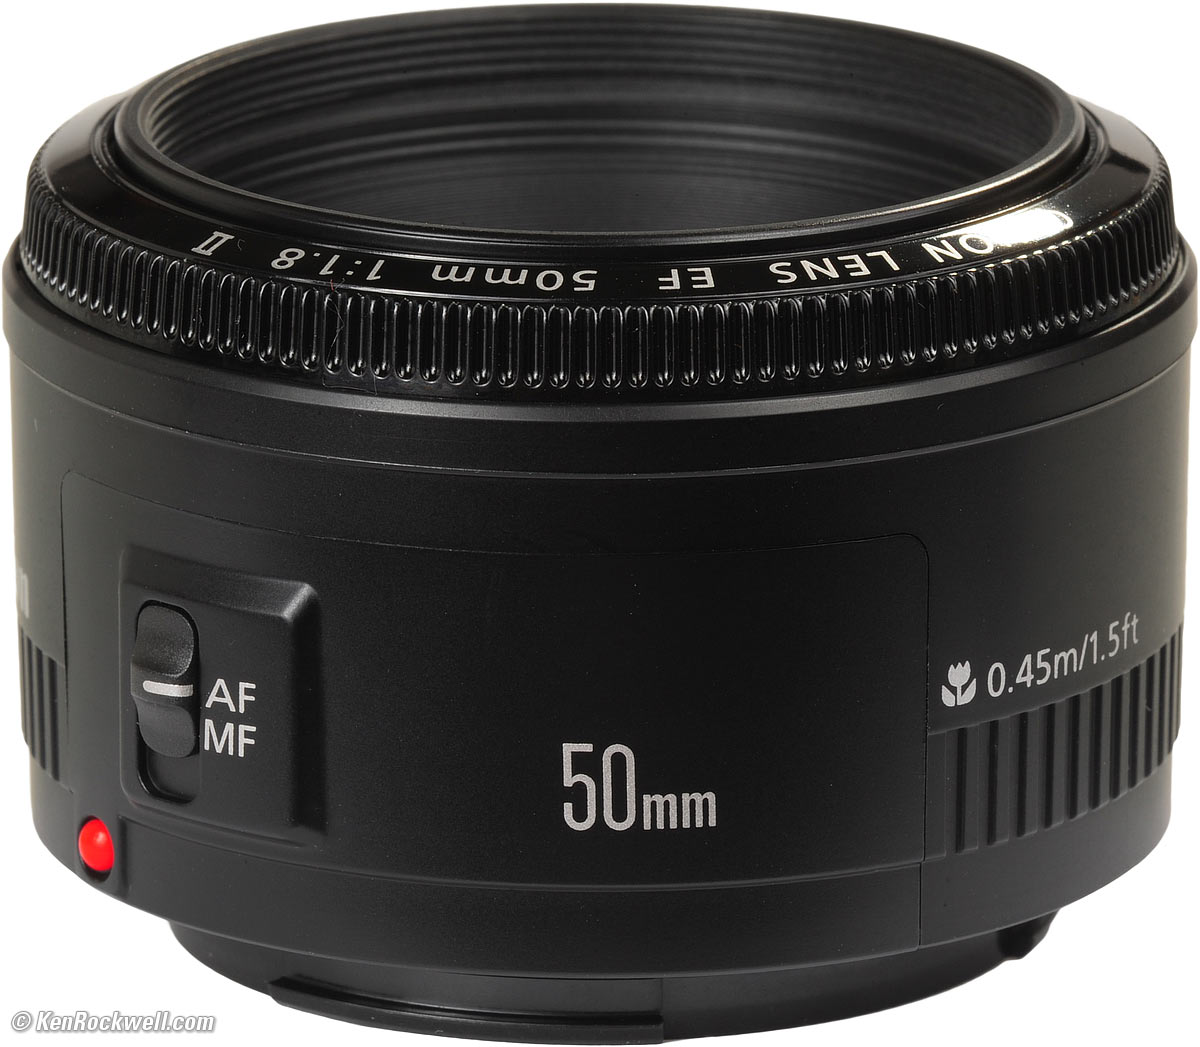 Canon 50mm f/1.8 II for dslr